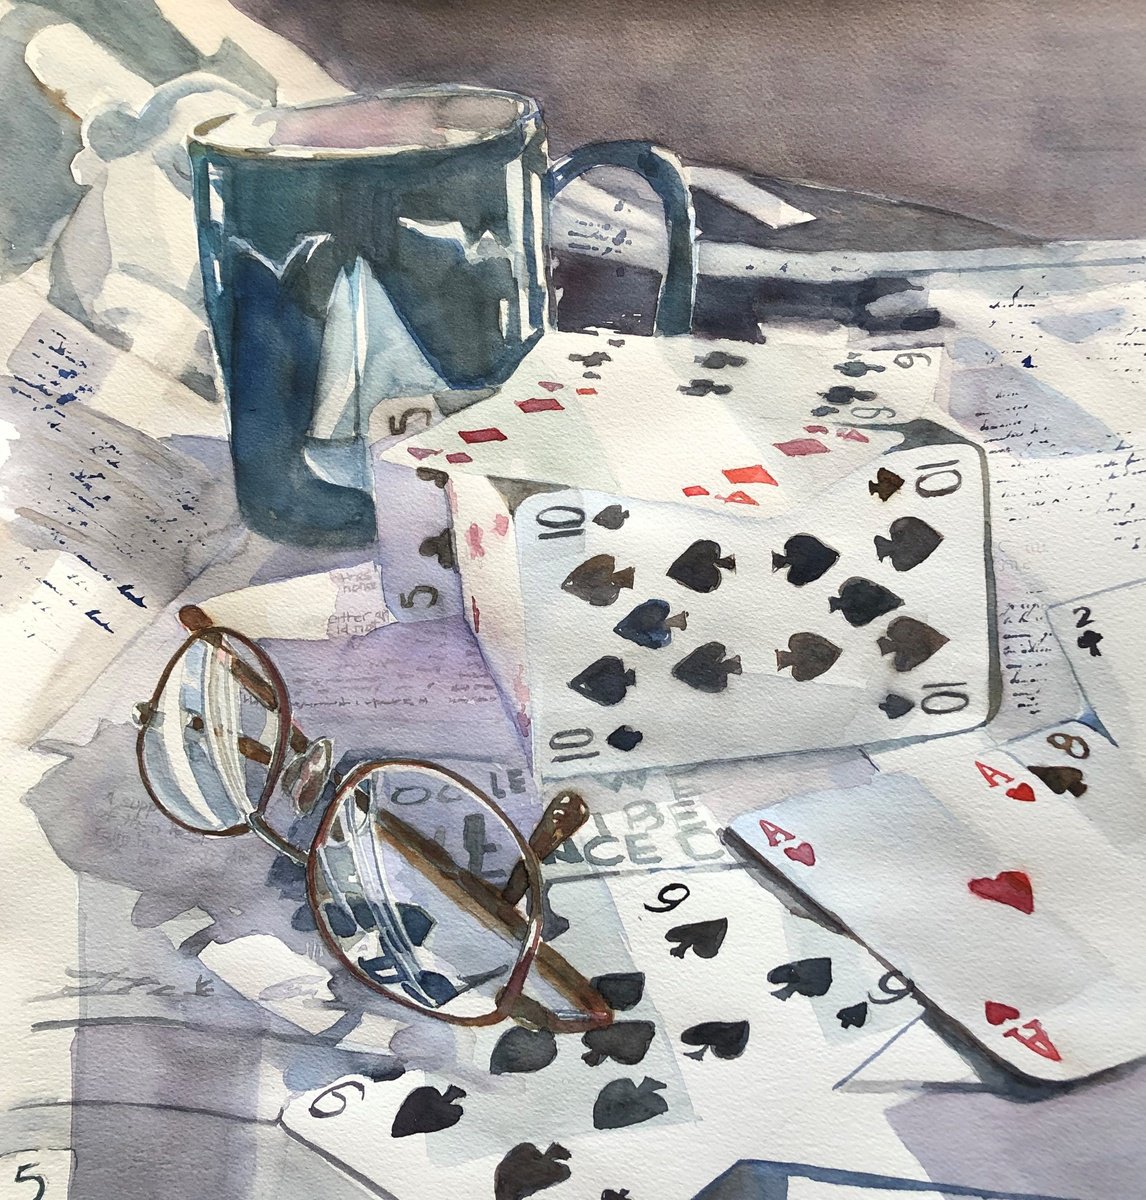 House of Cards by Bronwen Jones